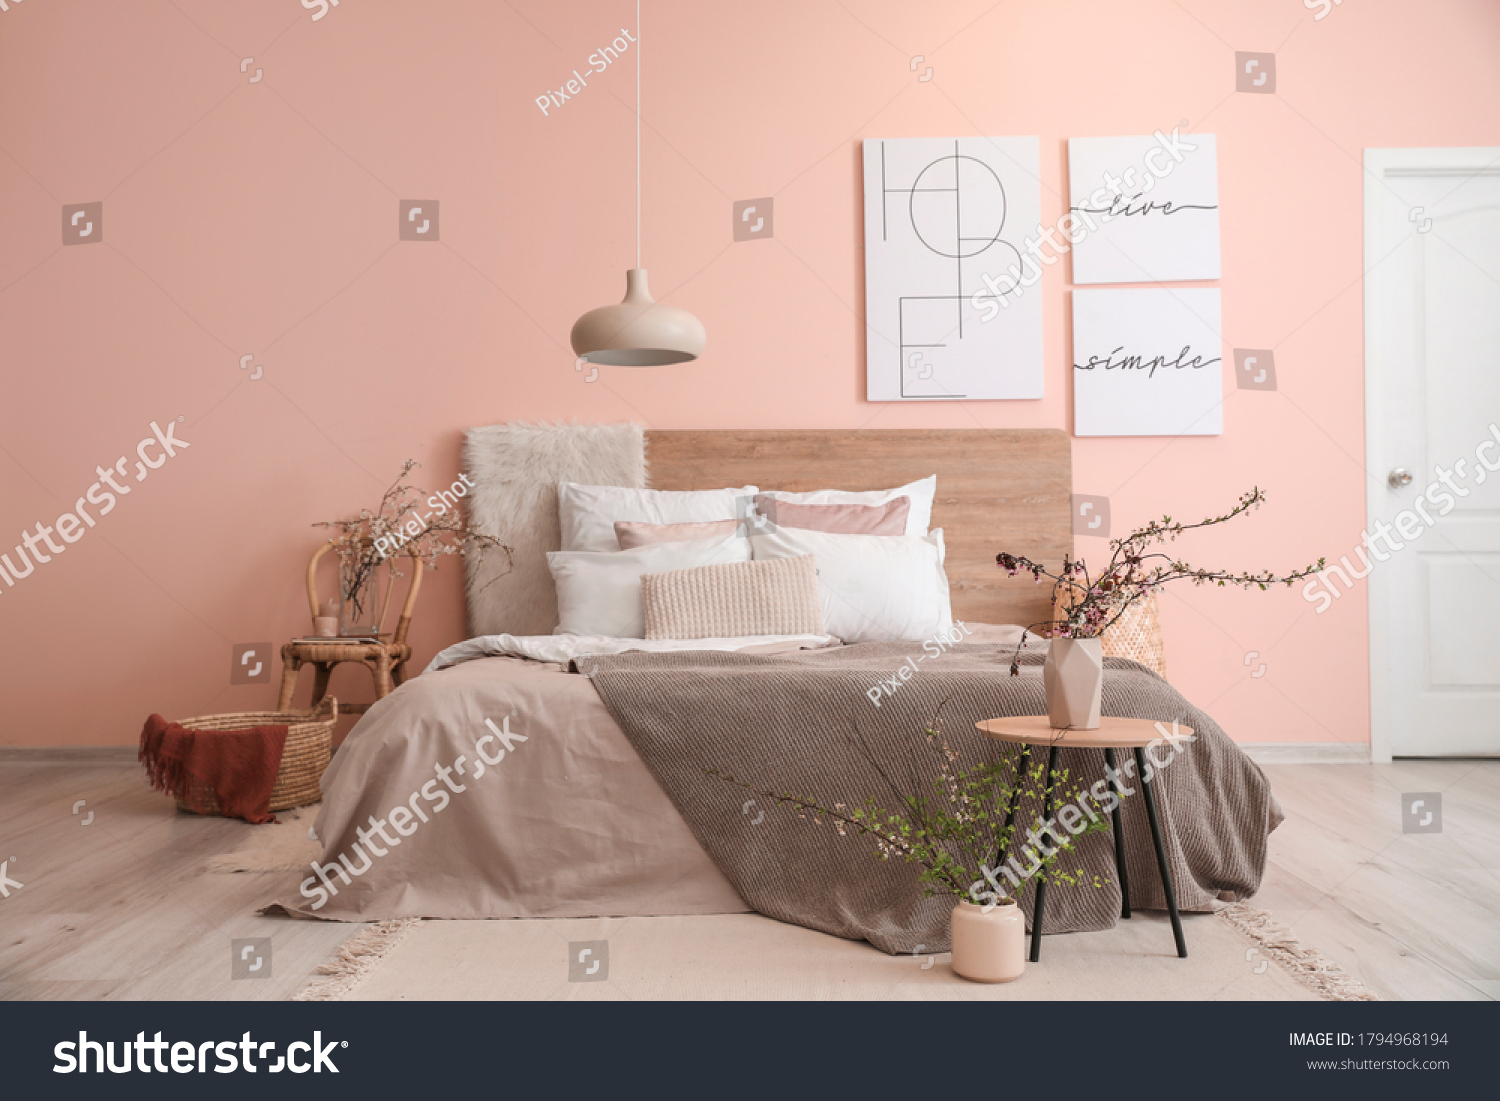 Interior of beautiful modern bedroom with spring flowers #1794968194